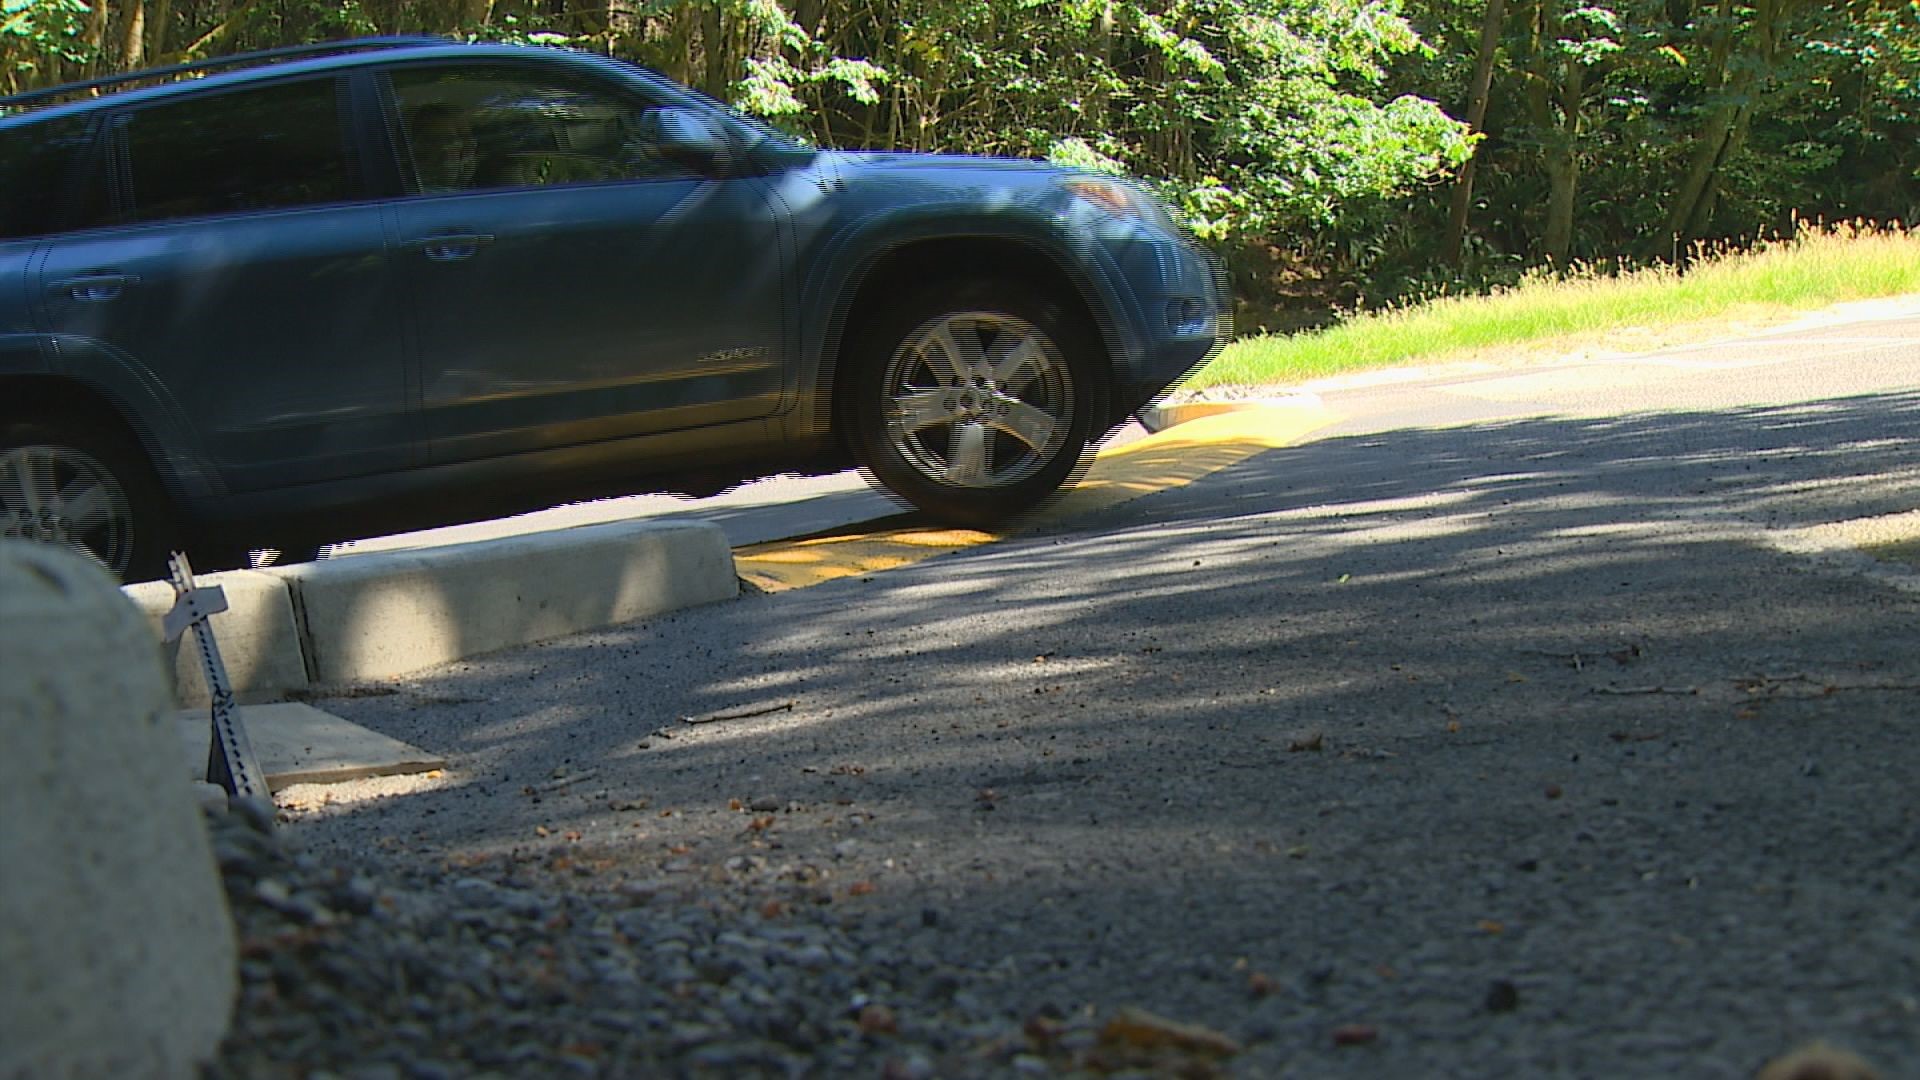 Drivers say the new speed bumps are actually doing more harm than good.